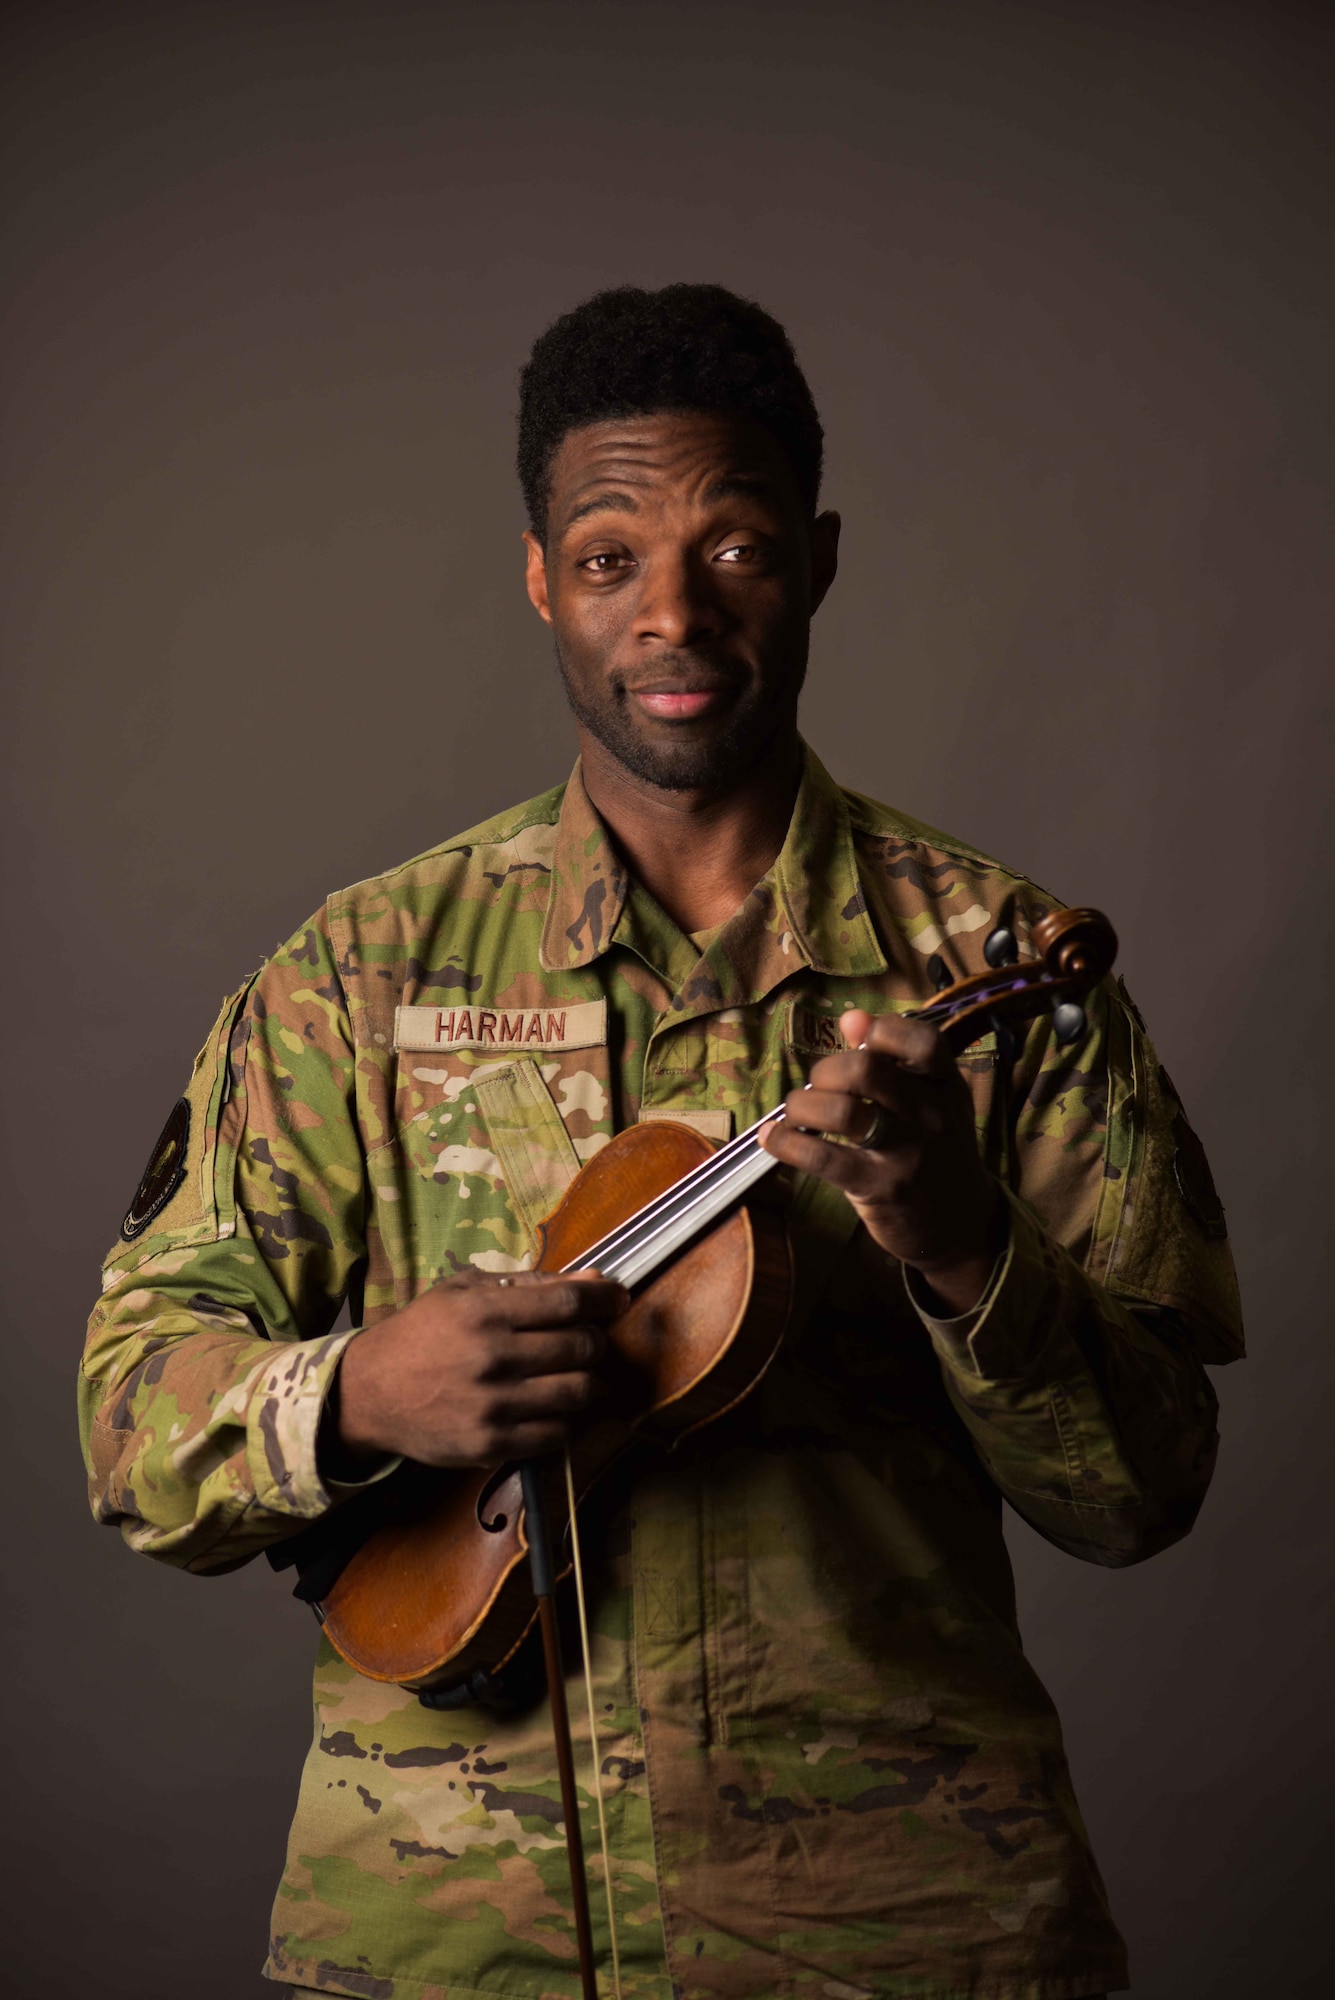 U.S. Air Force Senior Airman Joshua Harman, 95th Reconnaissance Squadron avionics journeyman, poses for a photo before playing the violin at Royal Air Force Mildenhall, England, April 3, 2024. Harman is the first HOPE specialist at the 95th RS. The HOPE spiritual fitness initiative is a community program that fosters connection among Airmen by promoting resilience, volunteering, morale, leadership, and spiritual growth inclusive to all religious beliefs. (U.S. Air Force photo by Senior Airman Viviam Chiu)